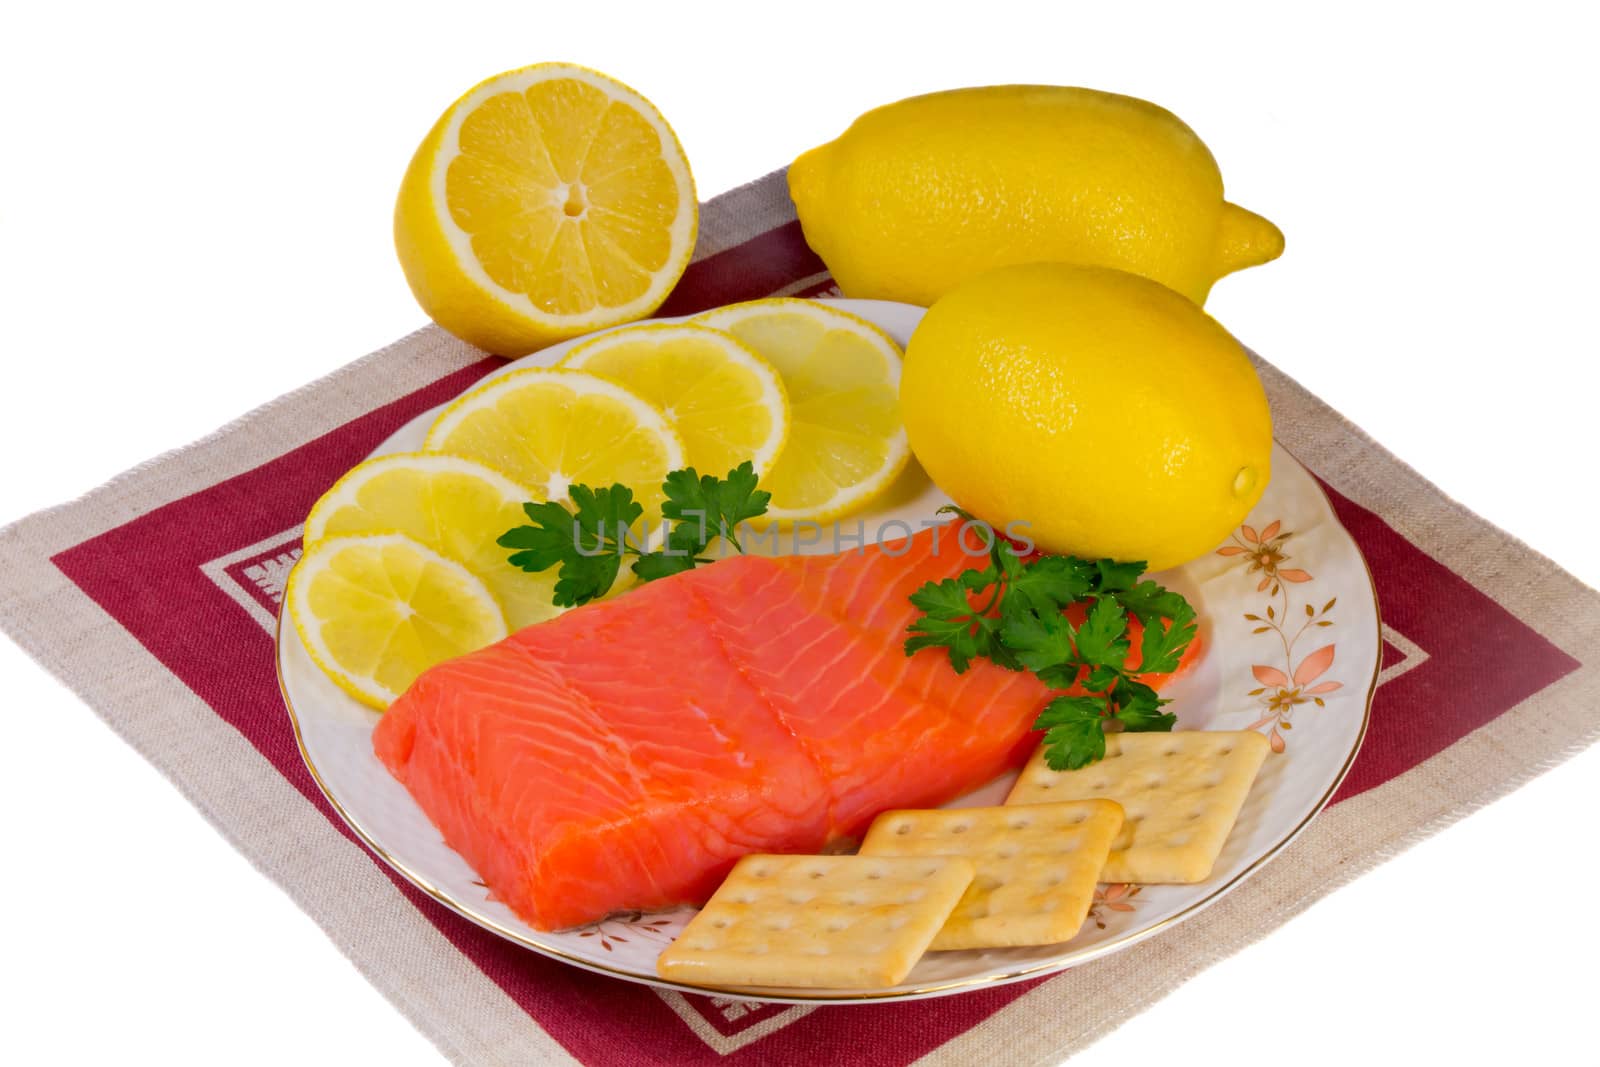 On a platter lie salmon fillet, lemons, sliced and whole, biscuits, fresh herbs parsley. Presented on a white background.